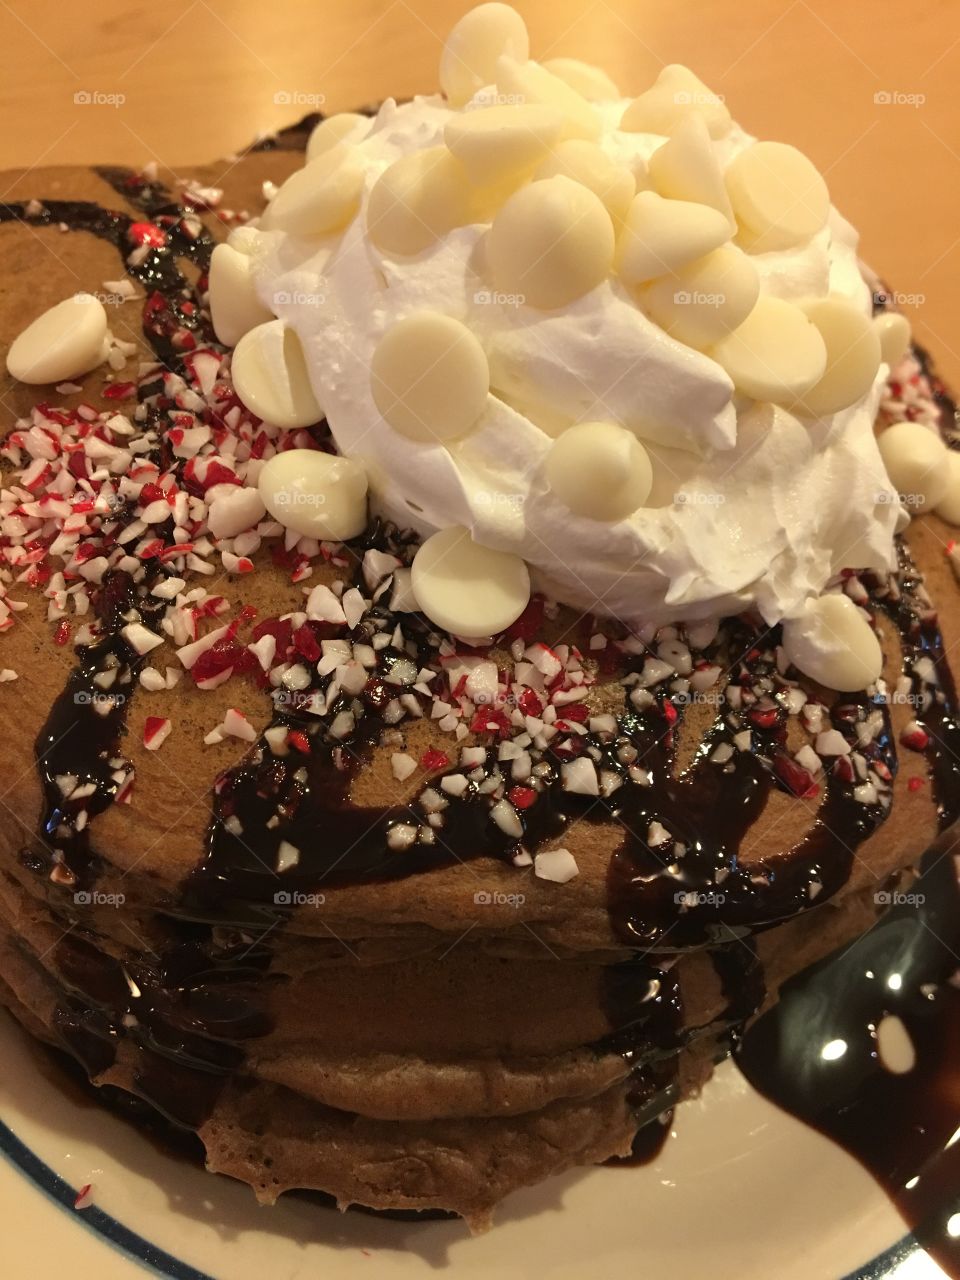 Chocolate Peppermint Pancakes with White Chocolate Chips, Chocolate Syrup and Whipped Cream 